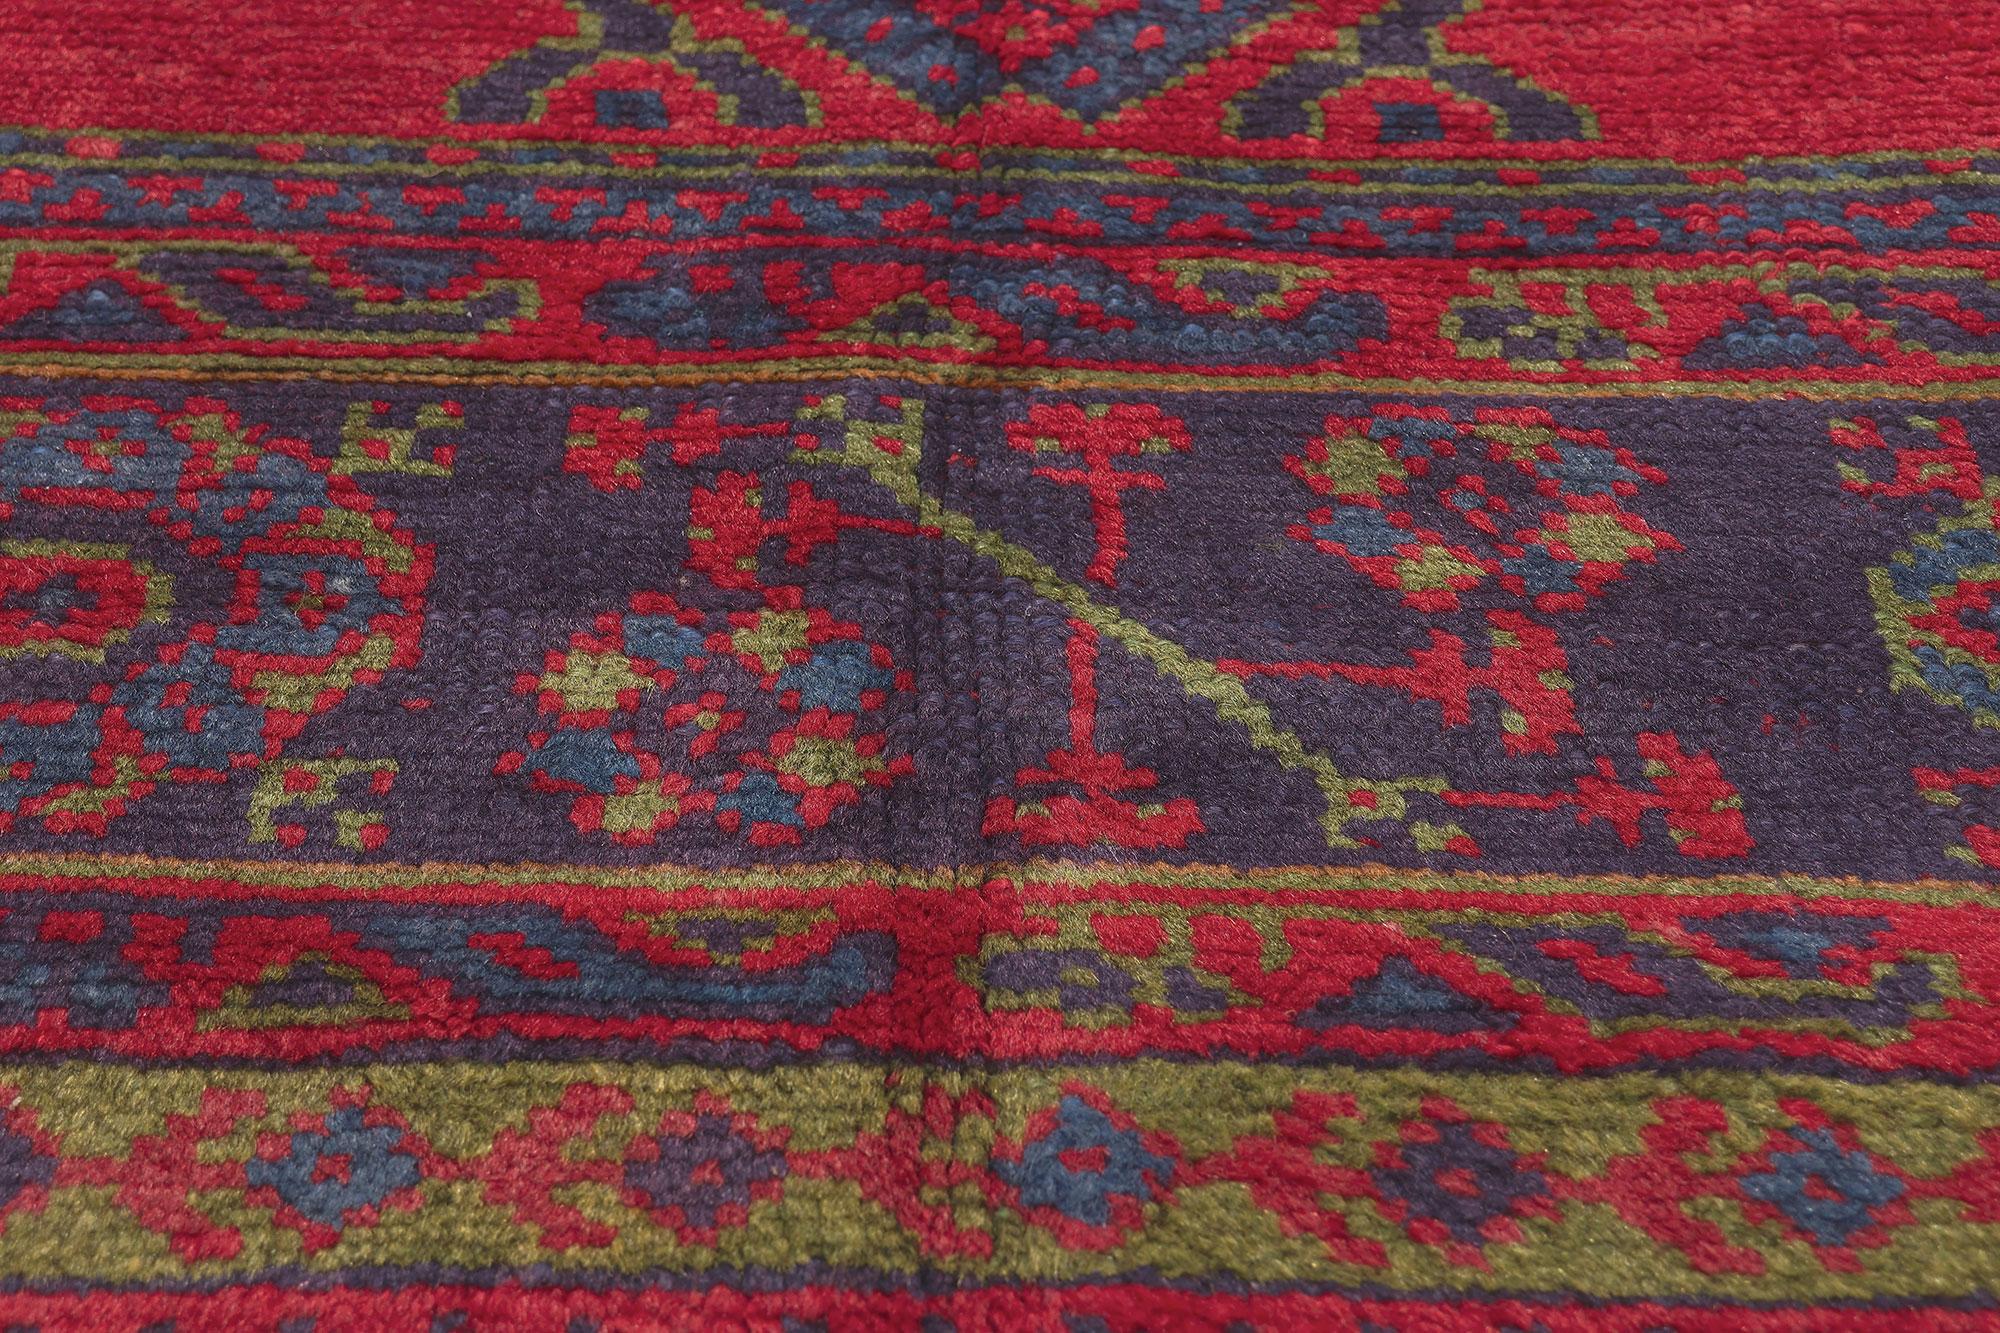 Antique Red Turkish Oushak Rug In Good Condition For Sale In Dallas, TX